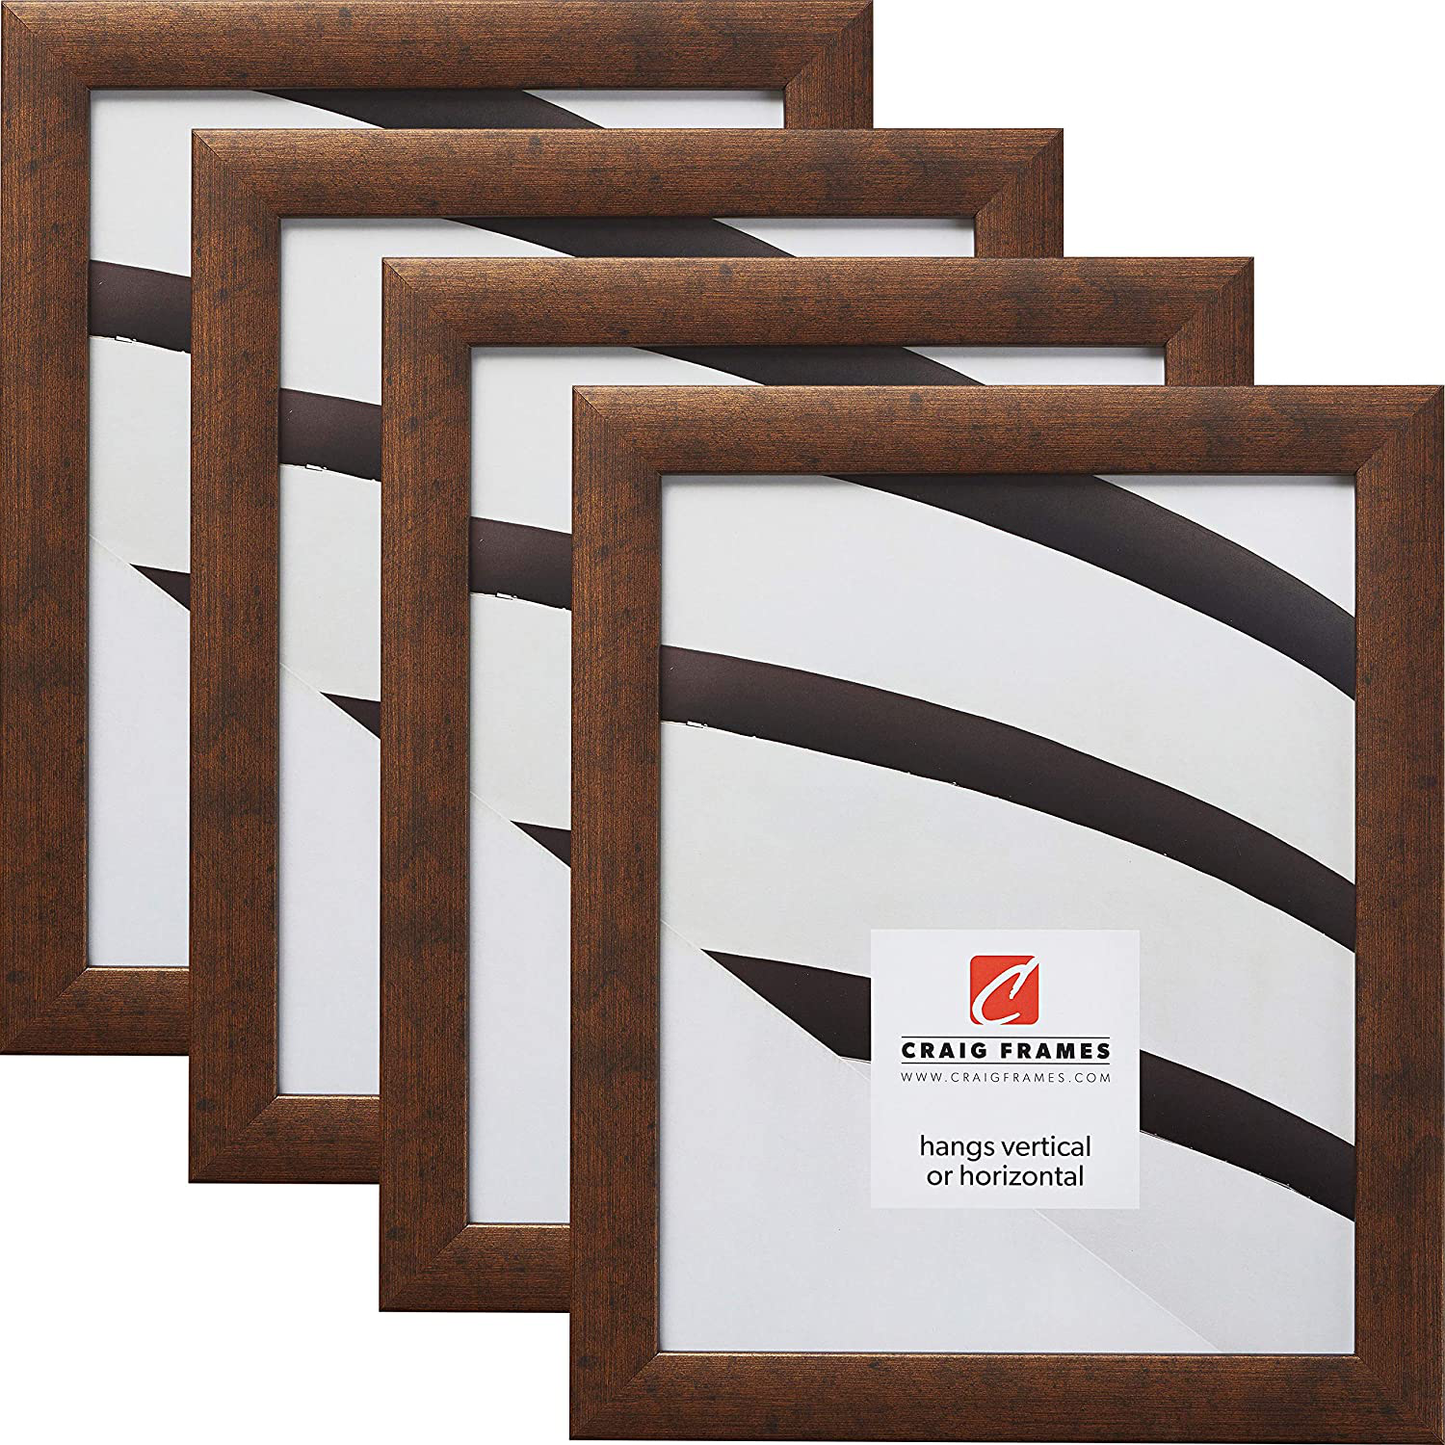 Craig Frames 23247881 24 x 36 Inch Picture Frame, Rustic Copper, Set of 4